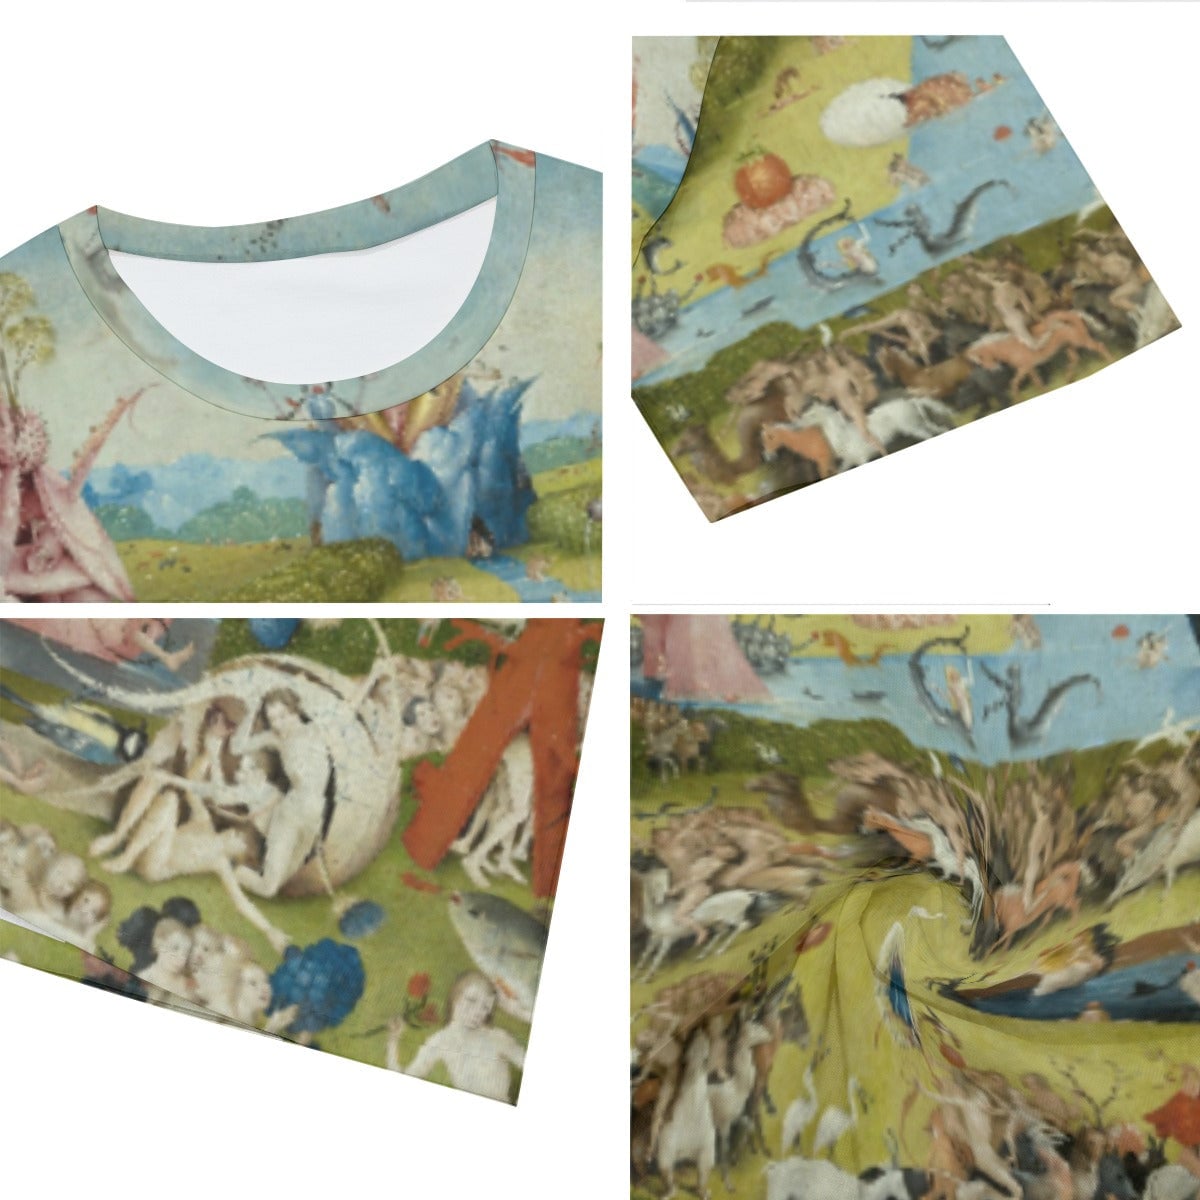 The Garden of Earthly Delights by Hieronymus Bosch T-Shirt